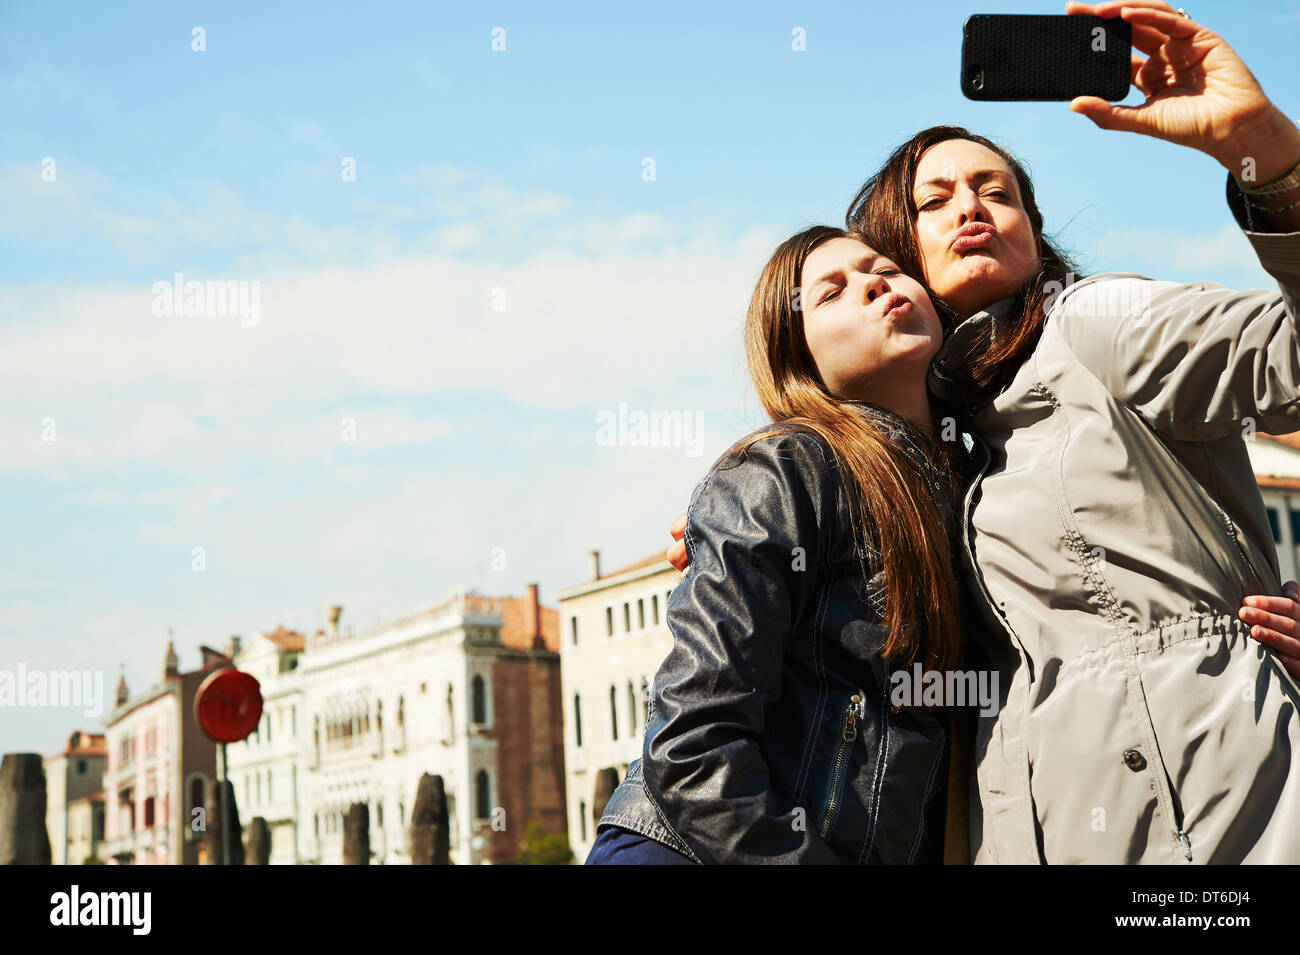 Mother and daughter taking selfie on smartphone, Venice, Italy Stock Photo